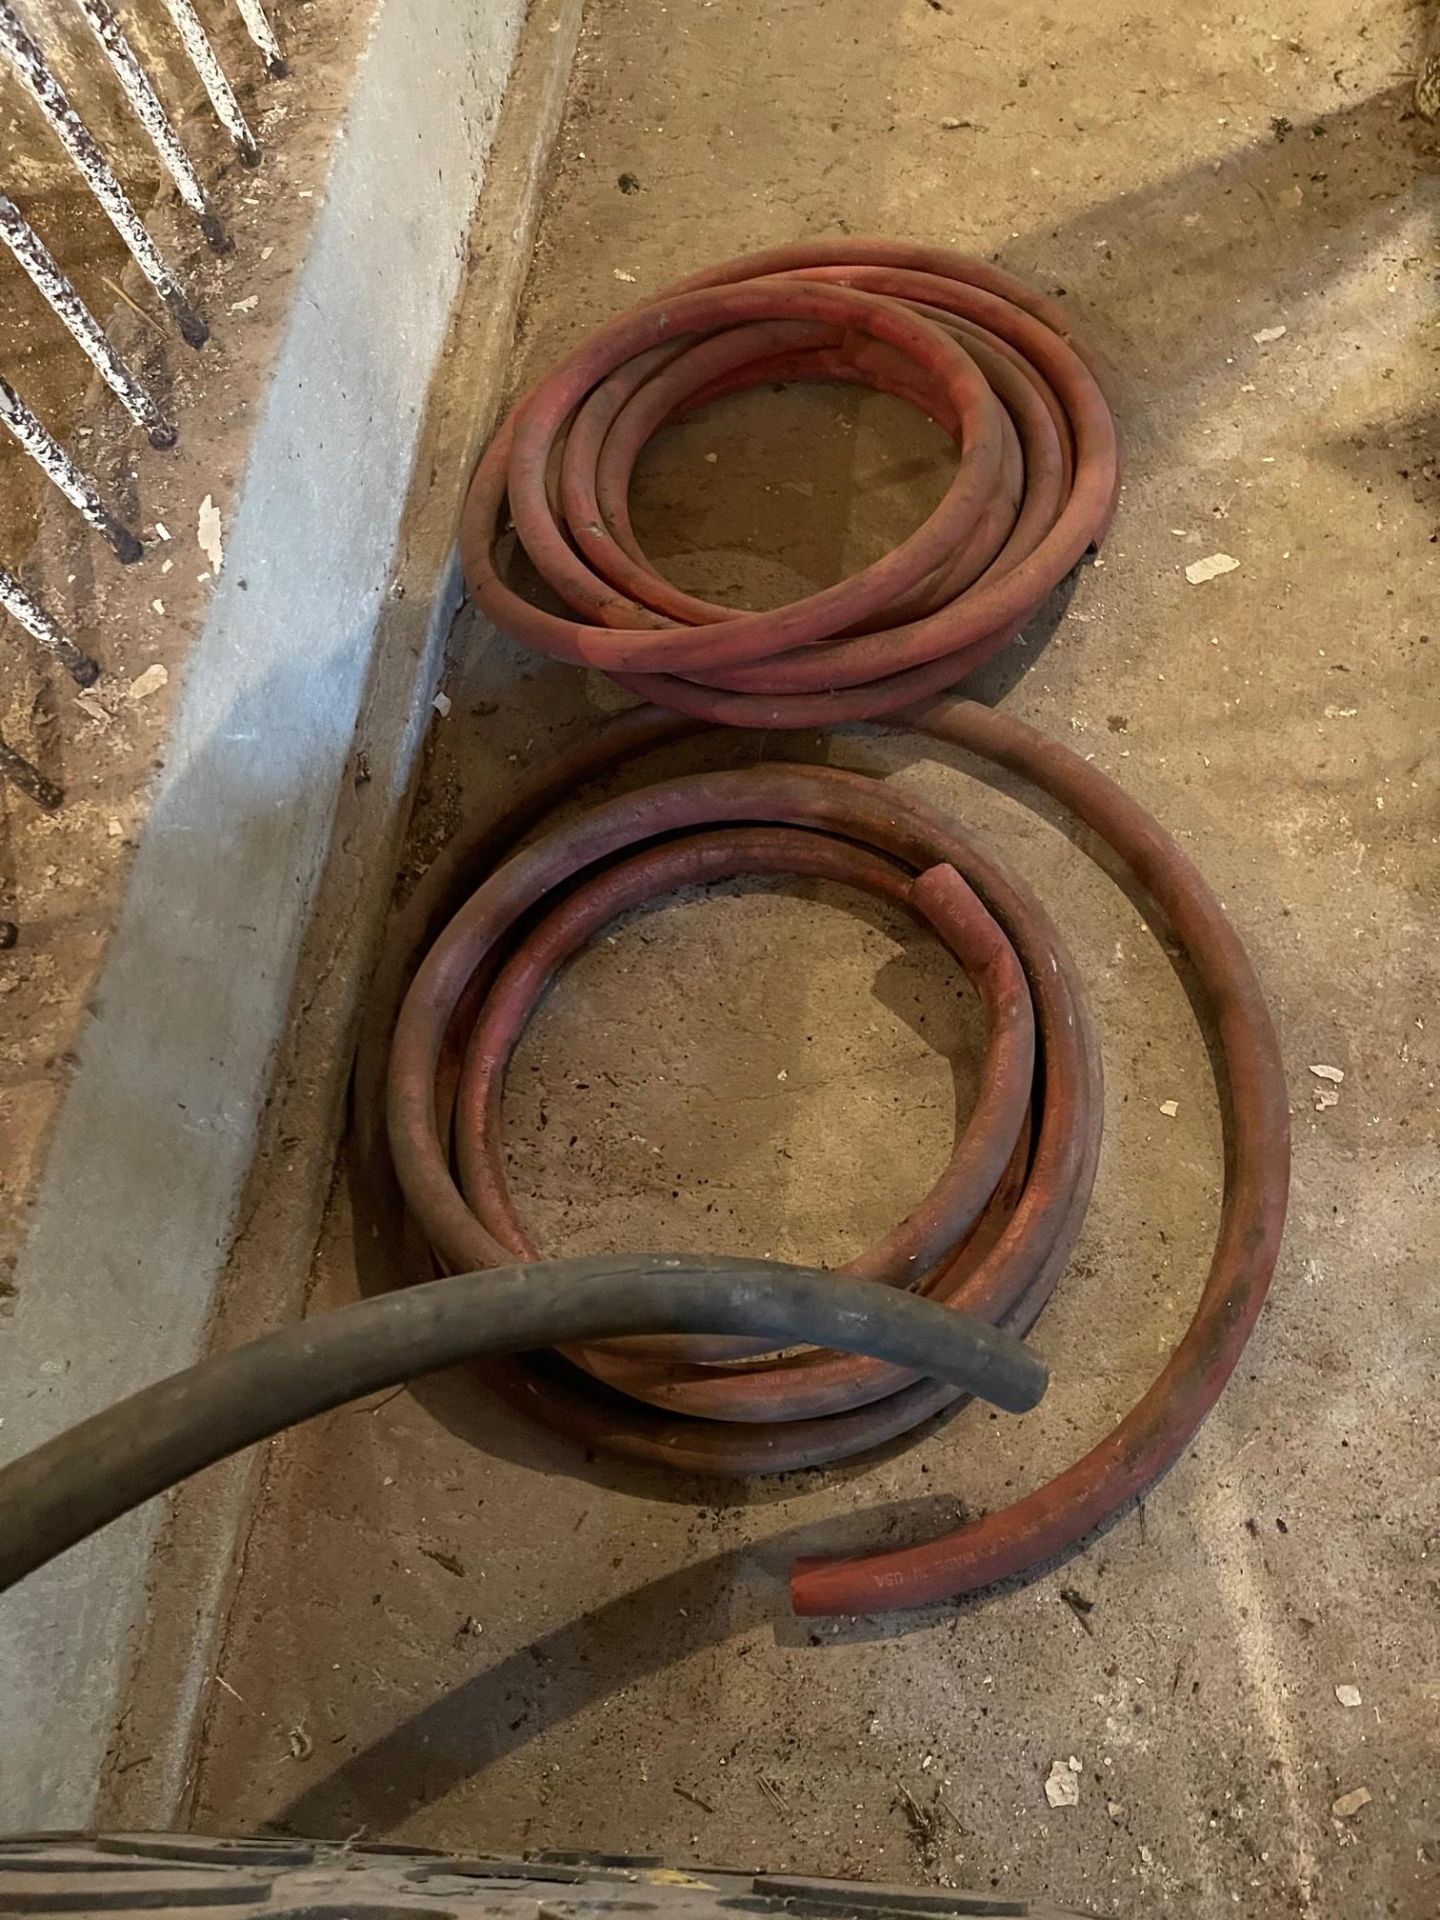 ASSORTED HYDRAULIC HOSES, 1/4 “, 5/16”, 1” AND HOT WATER 1” HOSE - Image 4 of 4